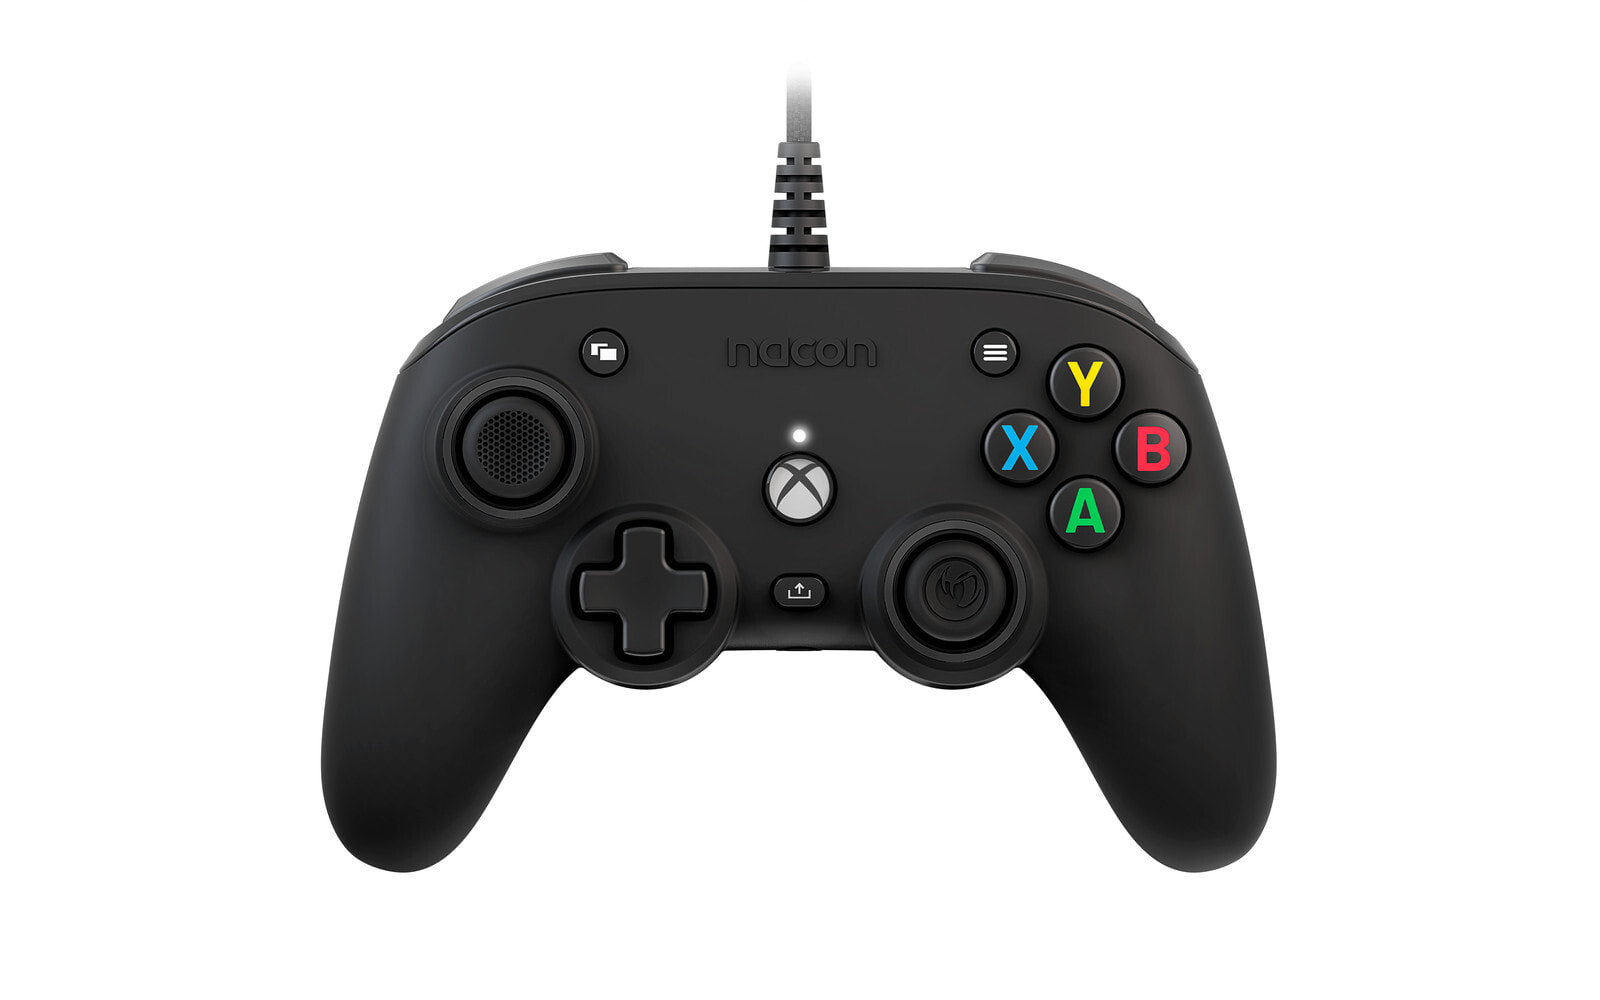 Nacon Pro Compact - Gamepad - PC - Xbox One - Xbox One X - Xbox Series S - Xbox Series X - D-pad - Menu button - Share button - Analogue / Digital - Wired - USB